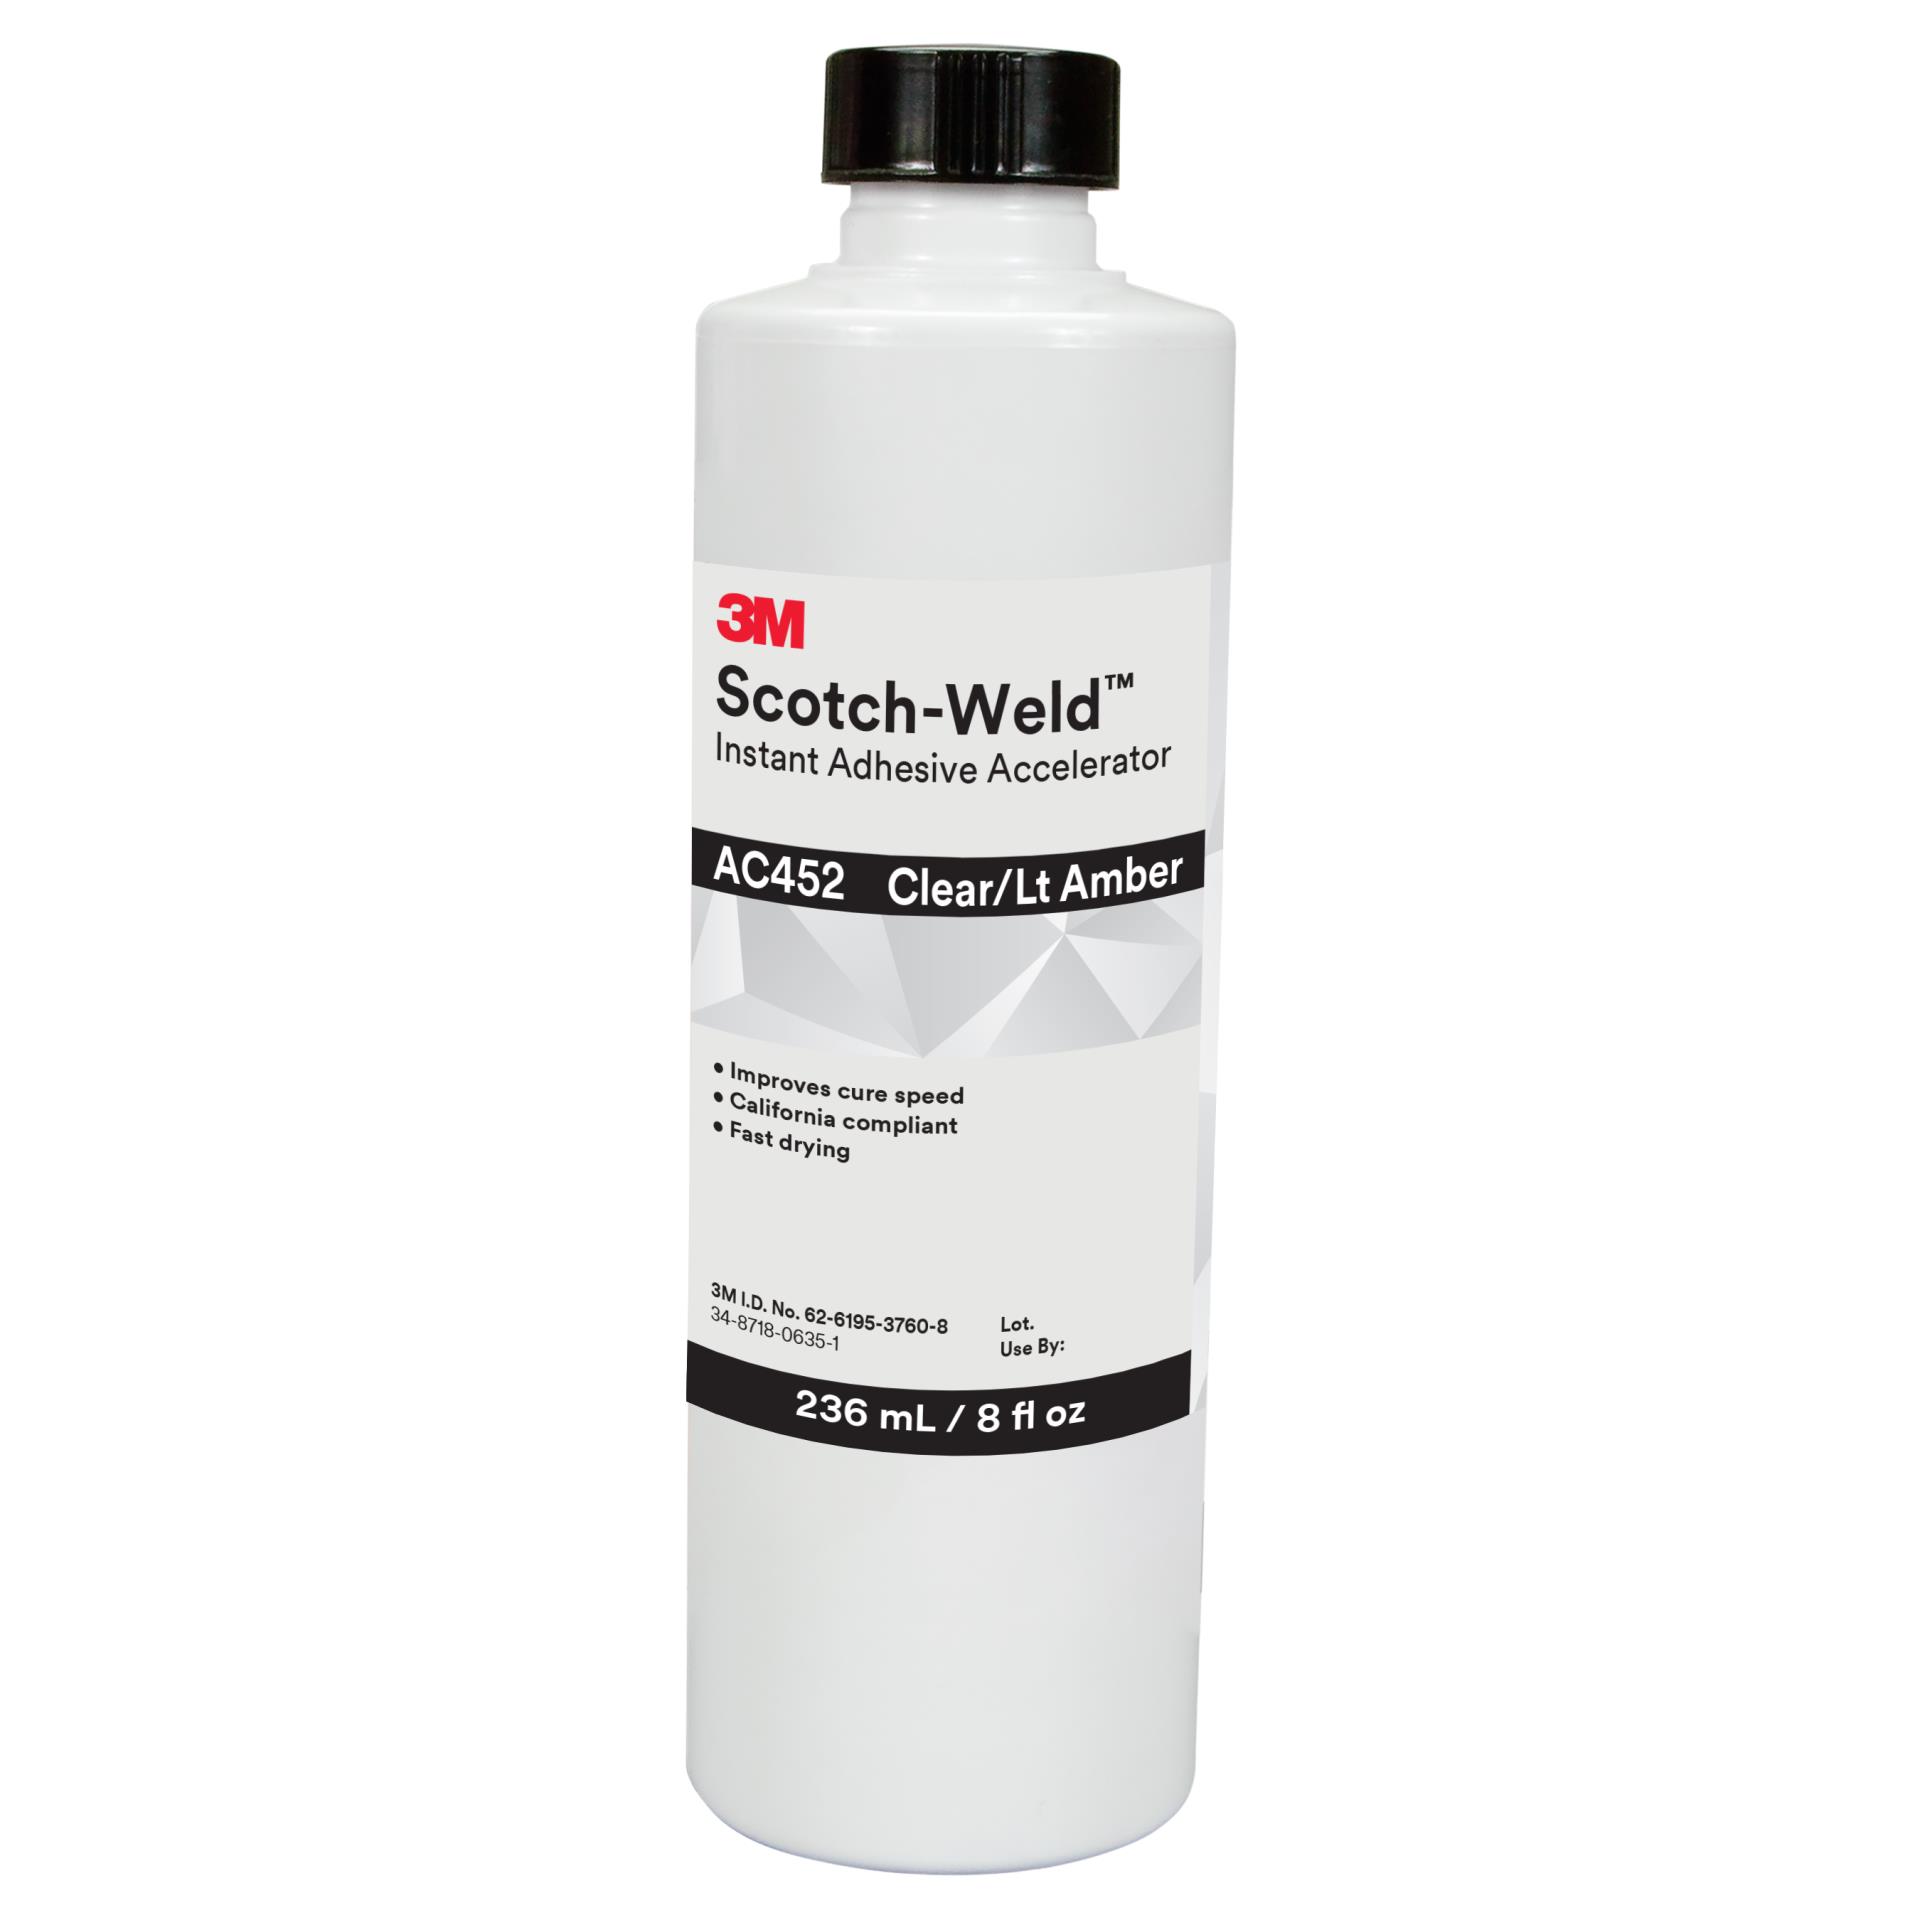 3M Scotch-Weld Industrial Plastic Adhesive, Clear - 36 count, 5 fl oz tubes